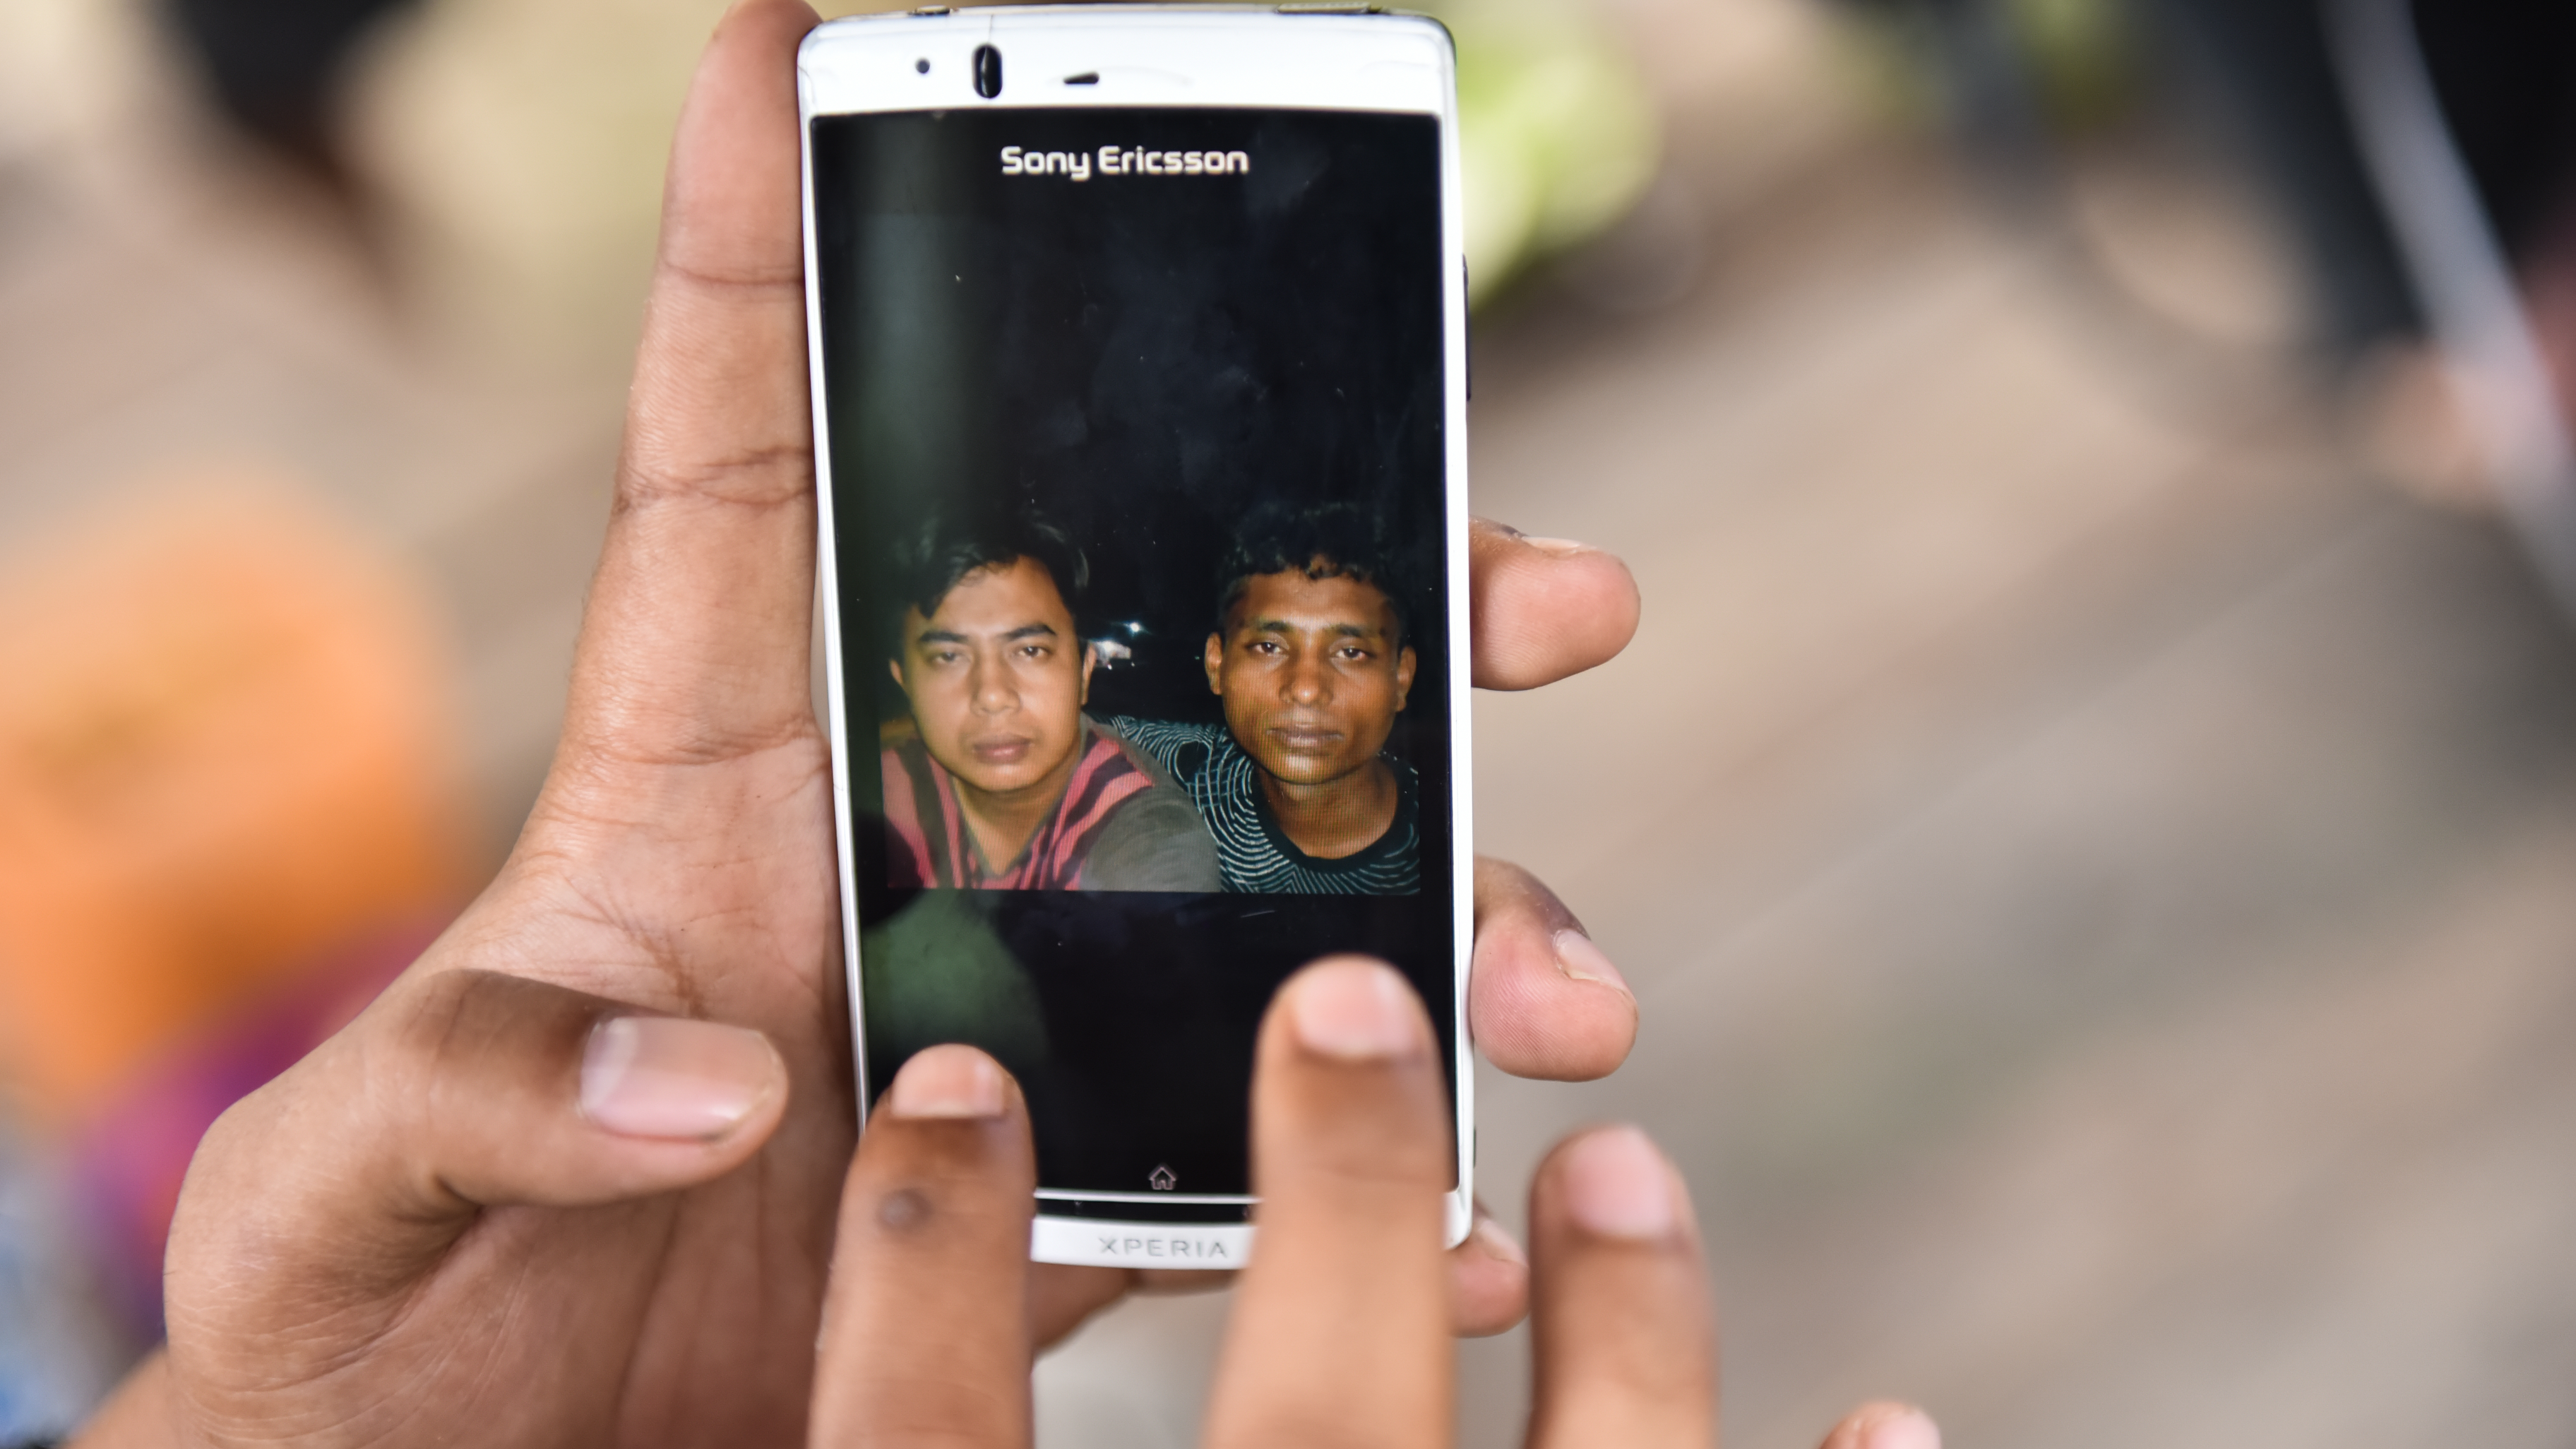 Fardan Rezeky shows pictures on his phone of friends he’s made in the Rohingya and Bangladeshi refugee camp in Bayeun, on July 19, 2015. Rezeky was there in May when the refugees arrived. He felt a call to help them, as many other countries helped Aceh af